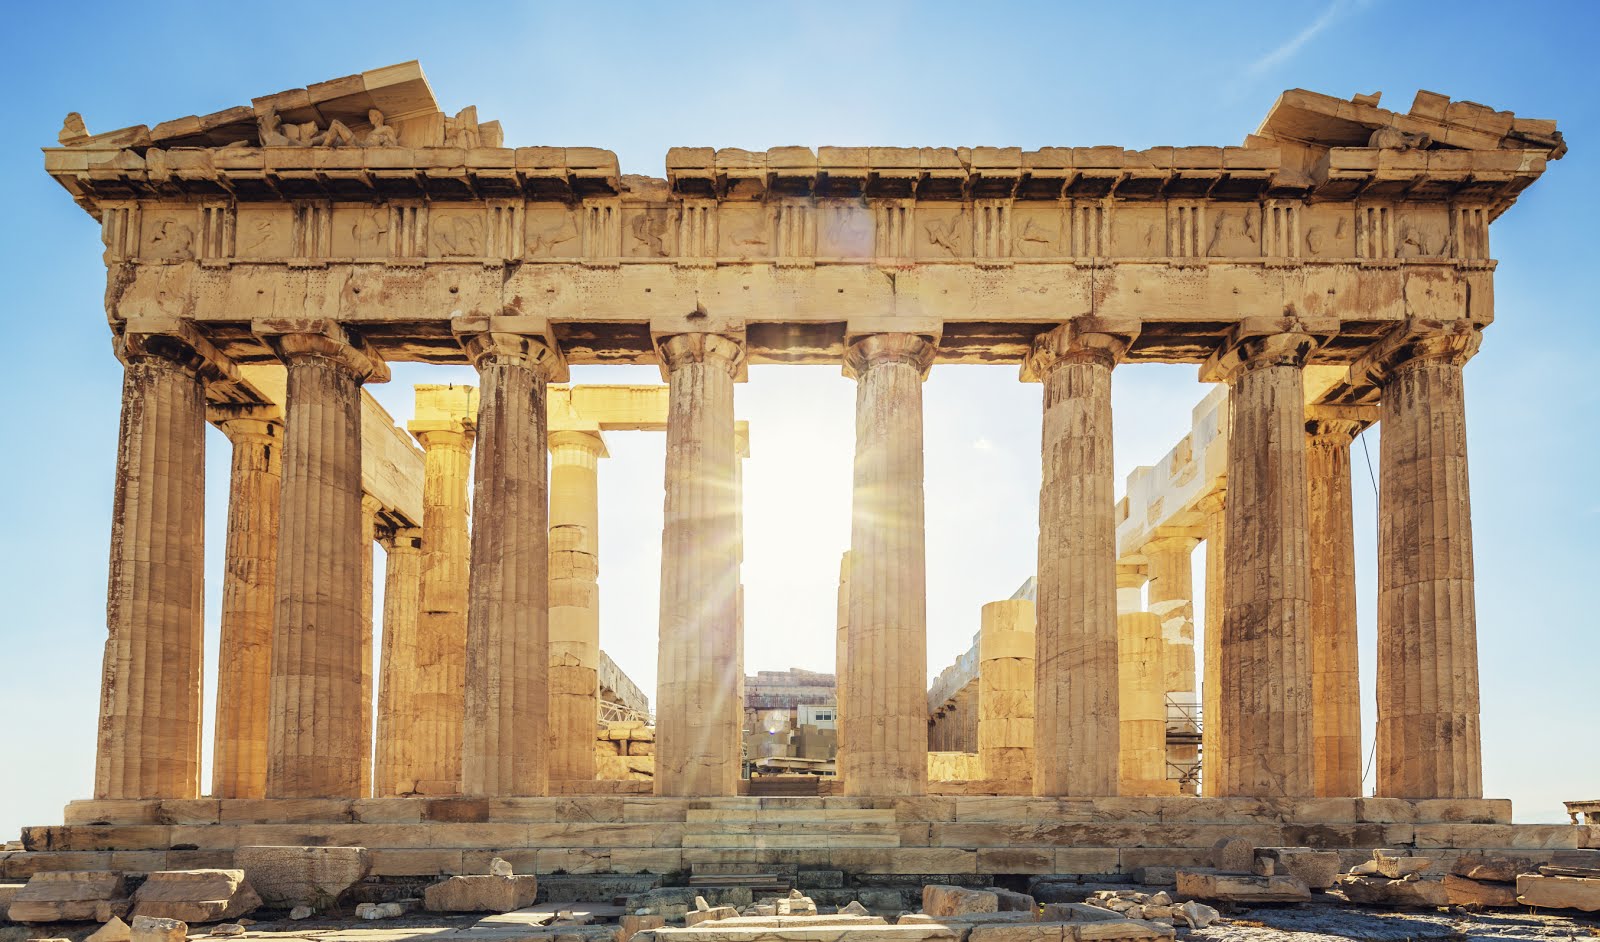 DISCOVER ATHENS AND THE ACROPOLIS